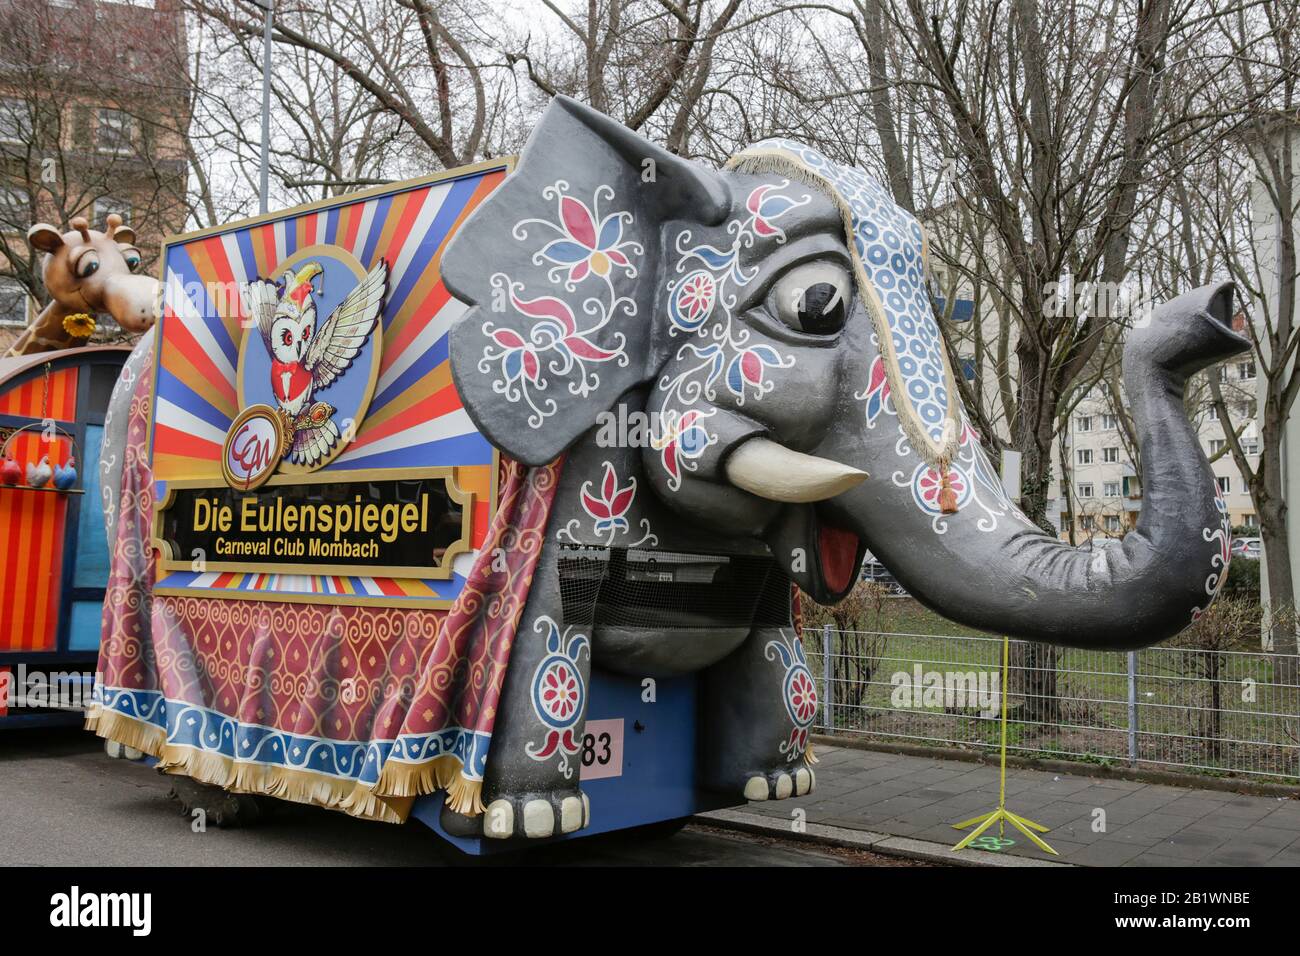 Mainz, Germany. 24th February 2020. A float from the Carneval Club Mombach Die Eulenspiegel in the form of an elephant takes part in the Mainz Rose Monday parade. Around half a million people lined the streets of Mainz for the traditional Rose Monday Carnival Parade. The 9 km long parade with over 9,000 participants is one of the three large Rose Monday Parades in Germany. Stock Photo